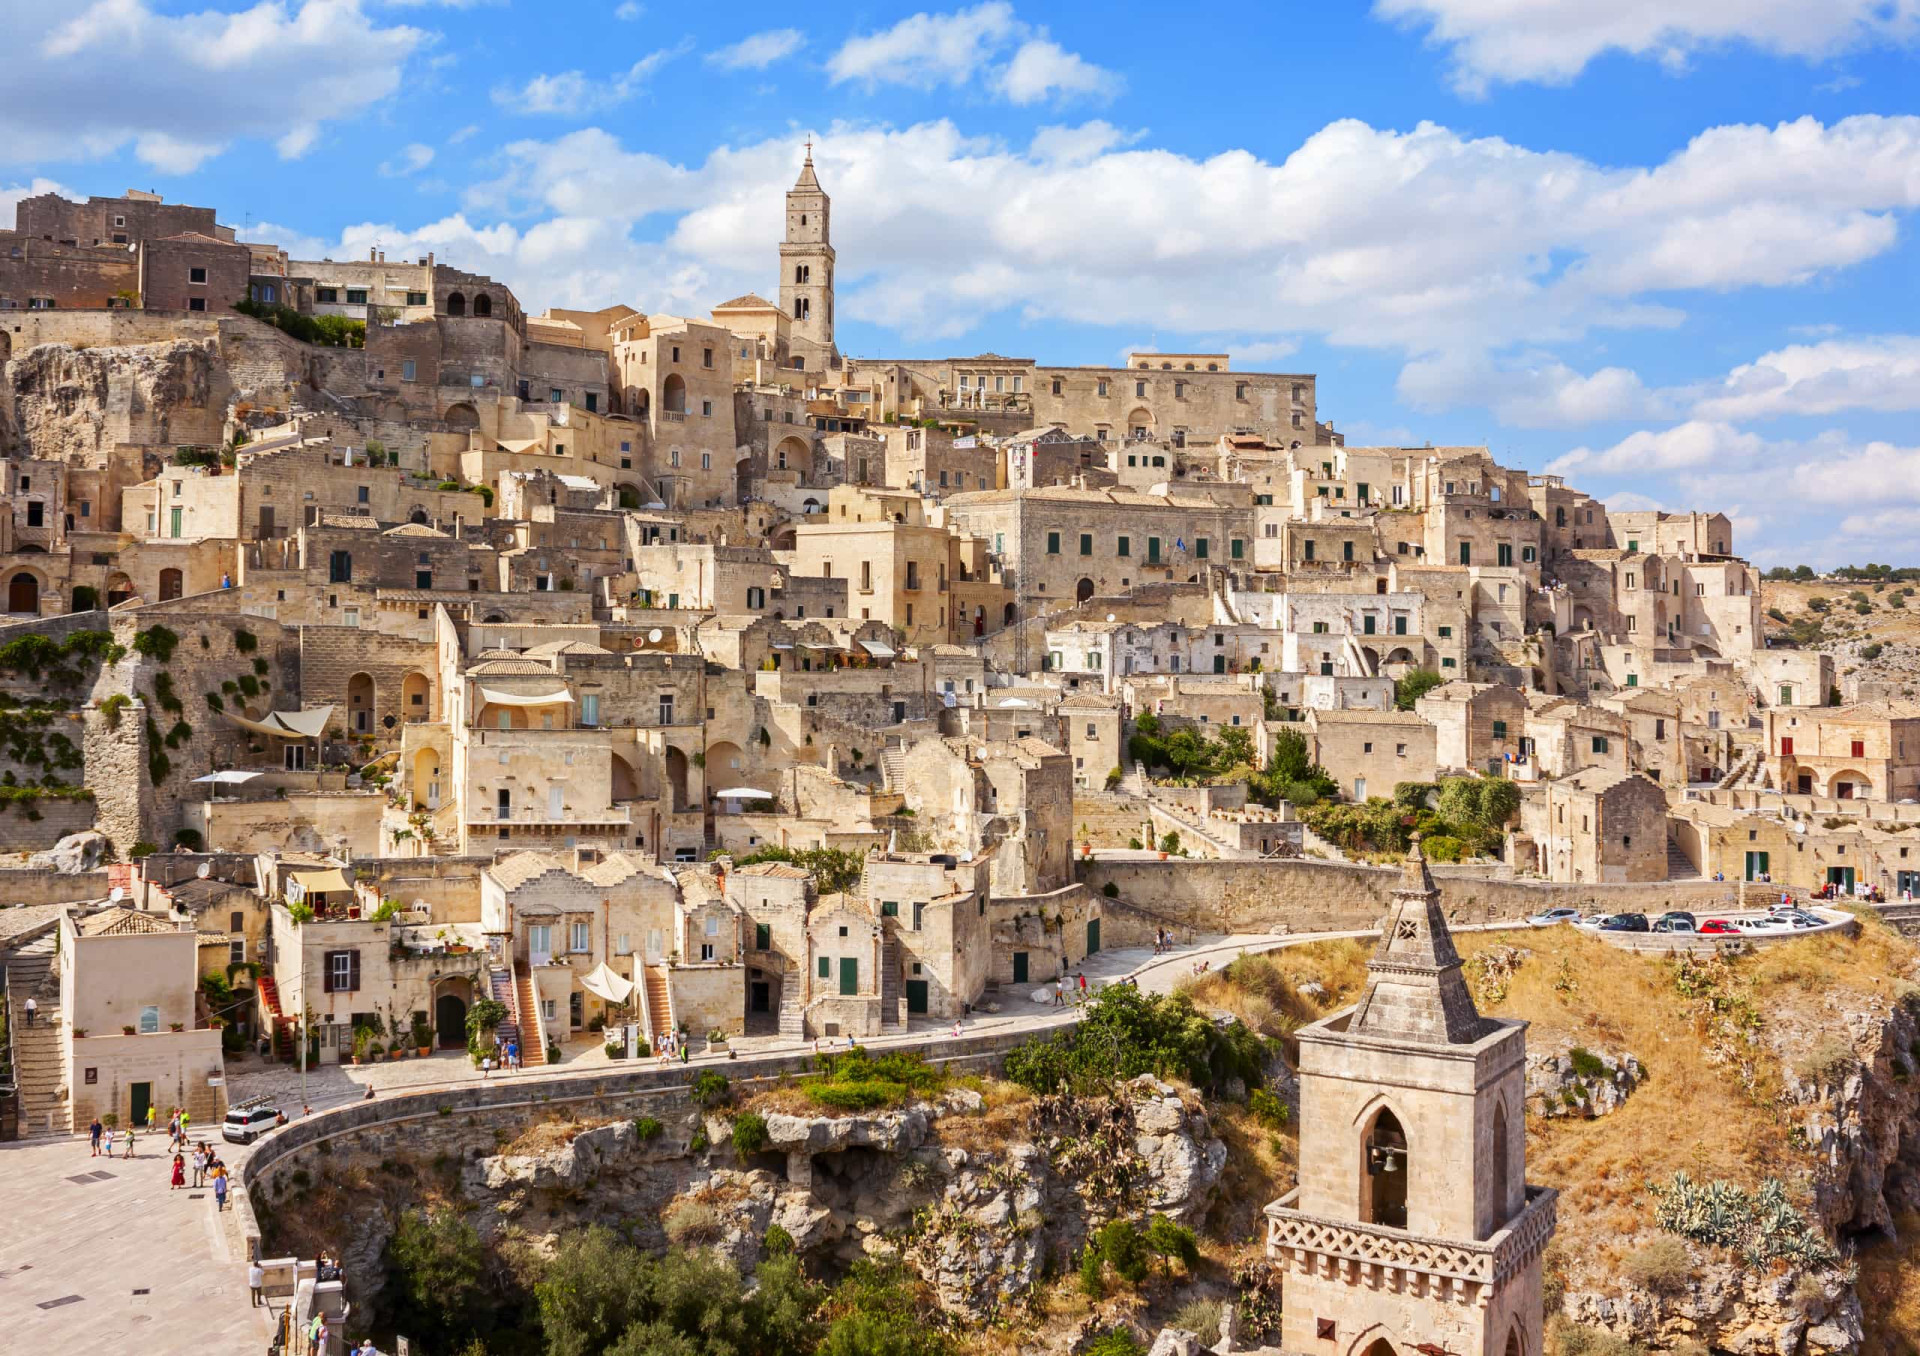 <p>Found in Italy's Basilicata region, Matera served as European Capital of Culture for 2019.</p> <p>Sources: (Biography) (The Guardian) </p> <p>See also: <a href="https://www.starsinsider.com/travel/322855/discover-italys-matera-where-hollywood-magic-happens">Discover Italy's Matera, where Hollywood magic happens</a></p>